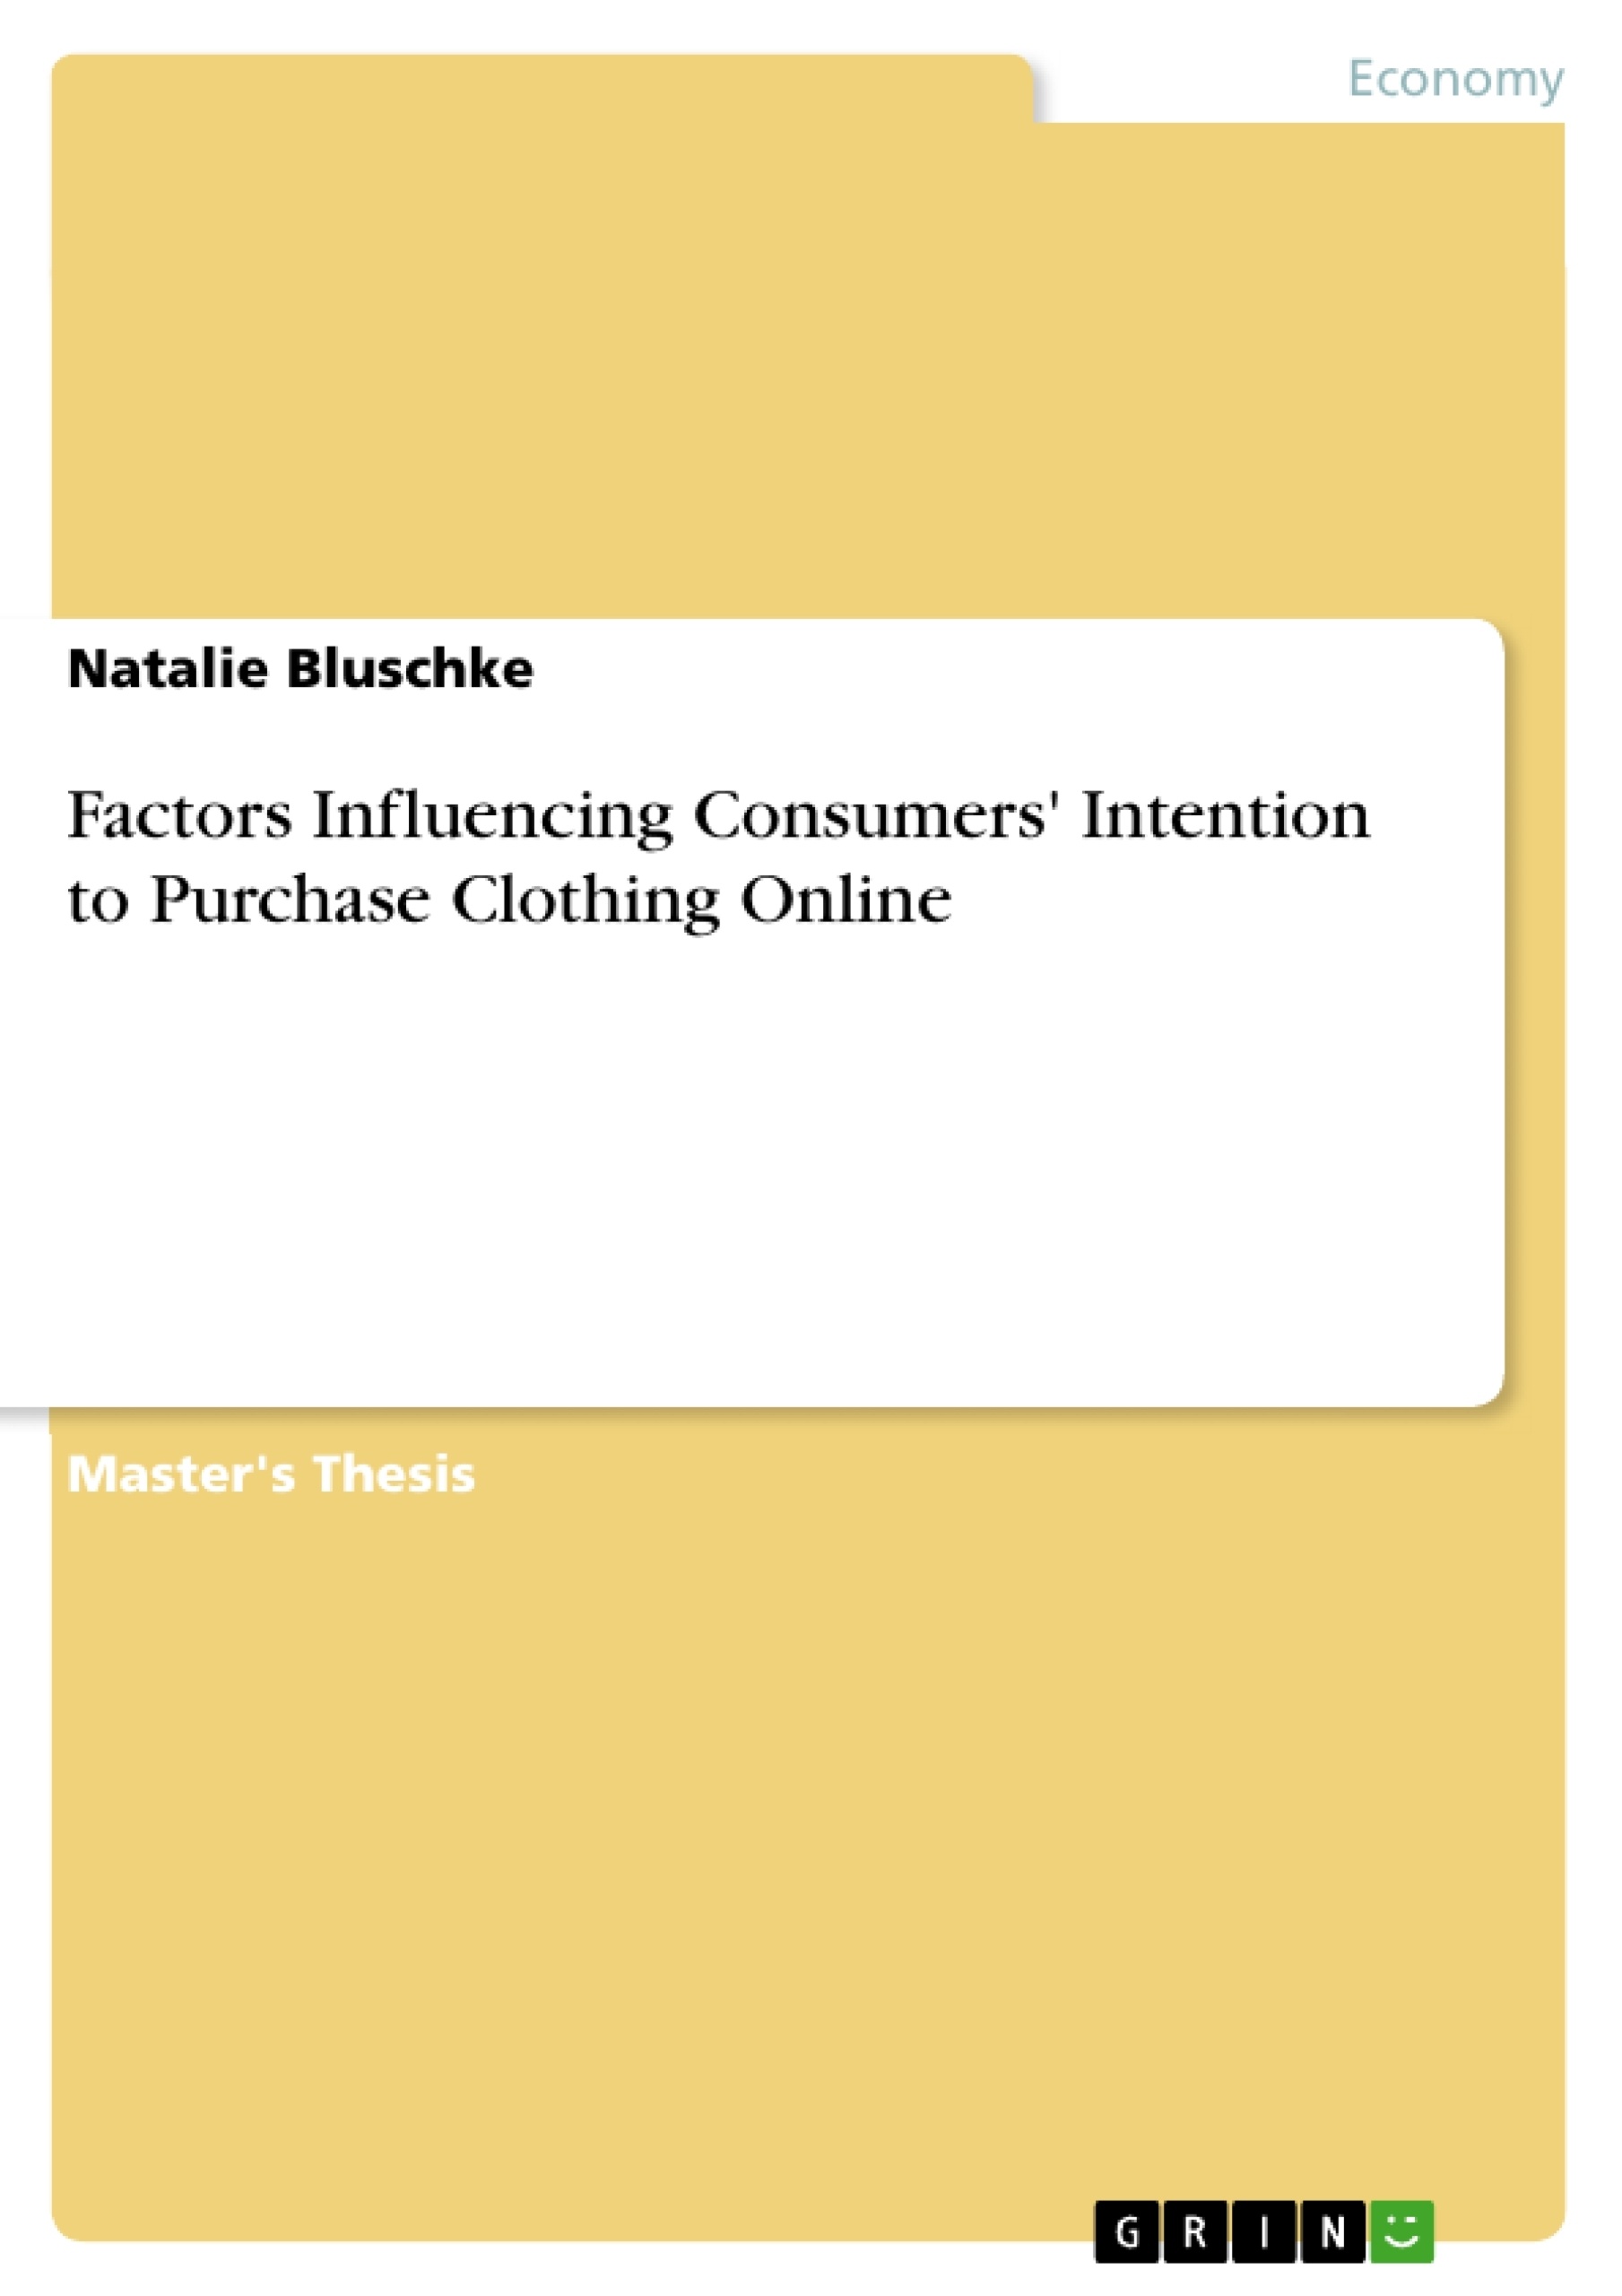 Title: Factors Influencing Consumers' Intention to Purchase Clothing Online